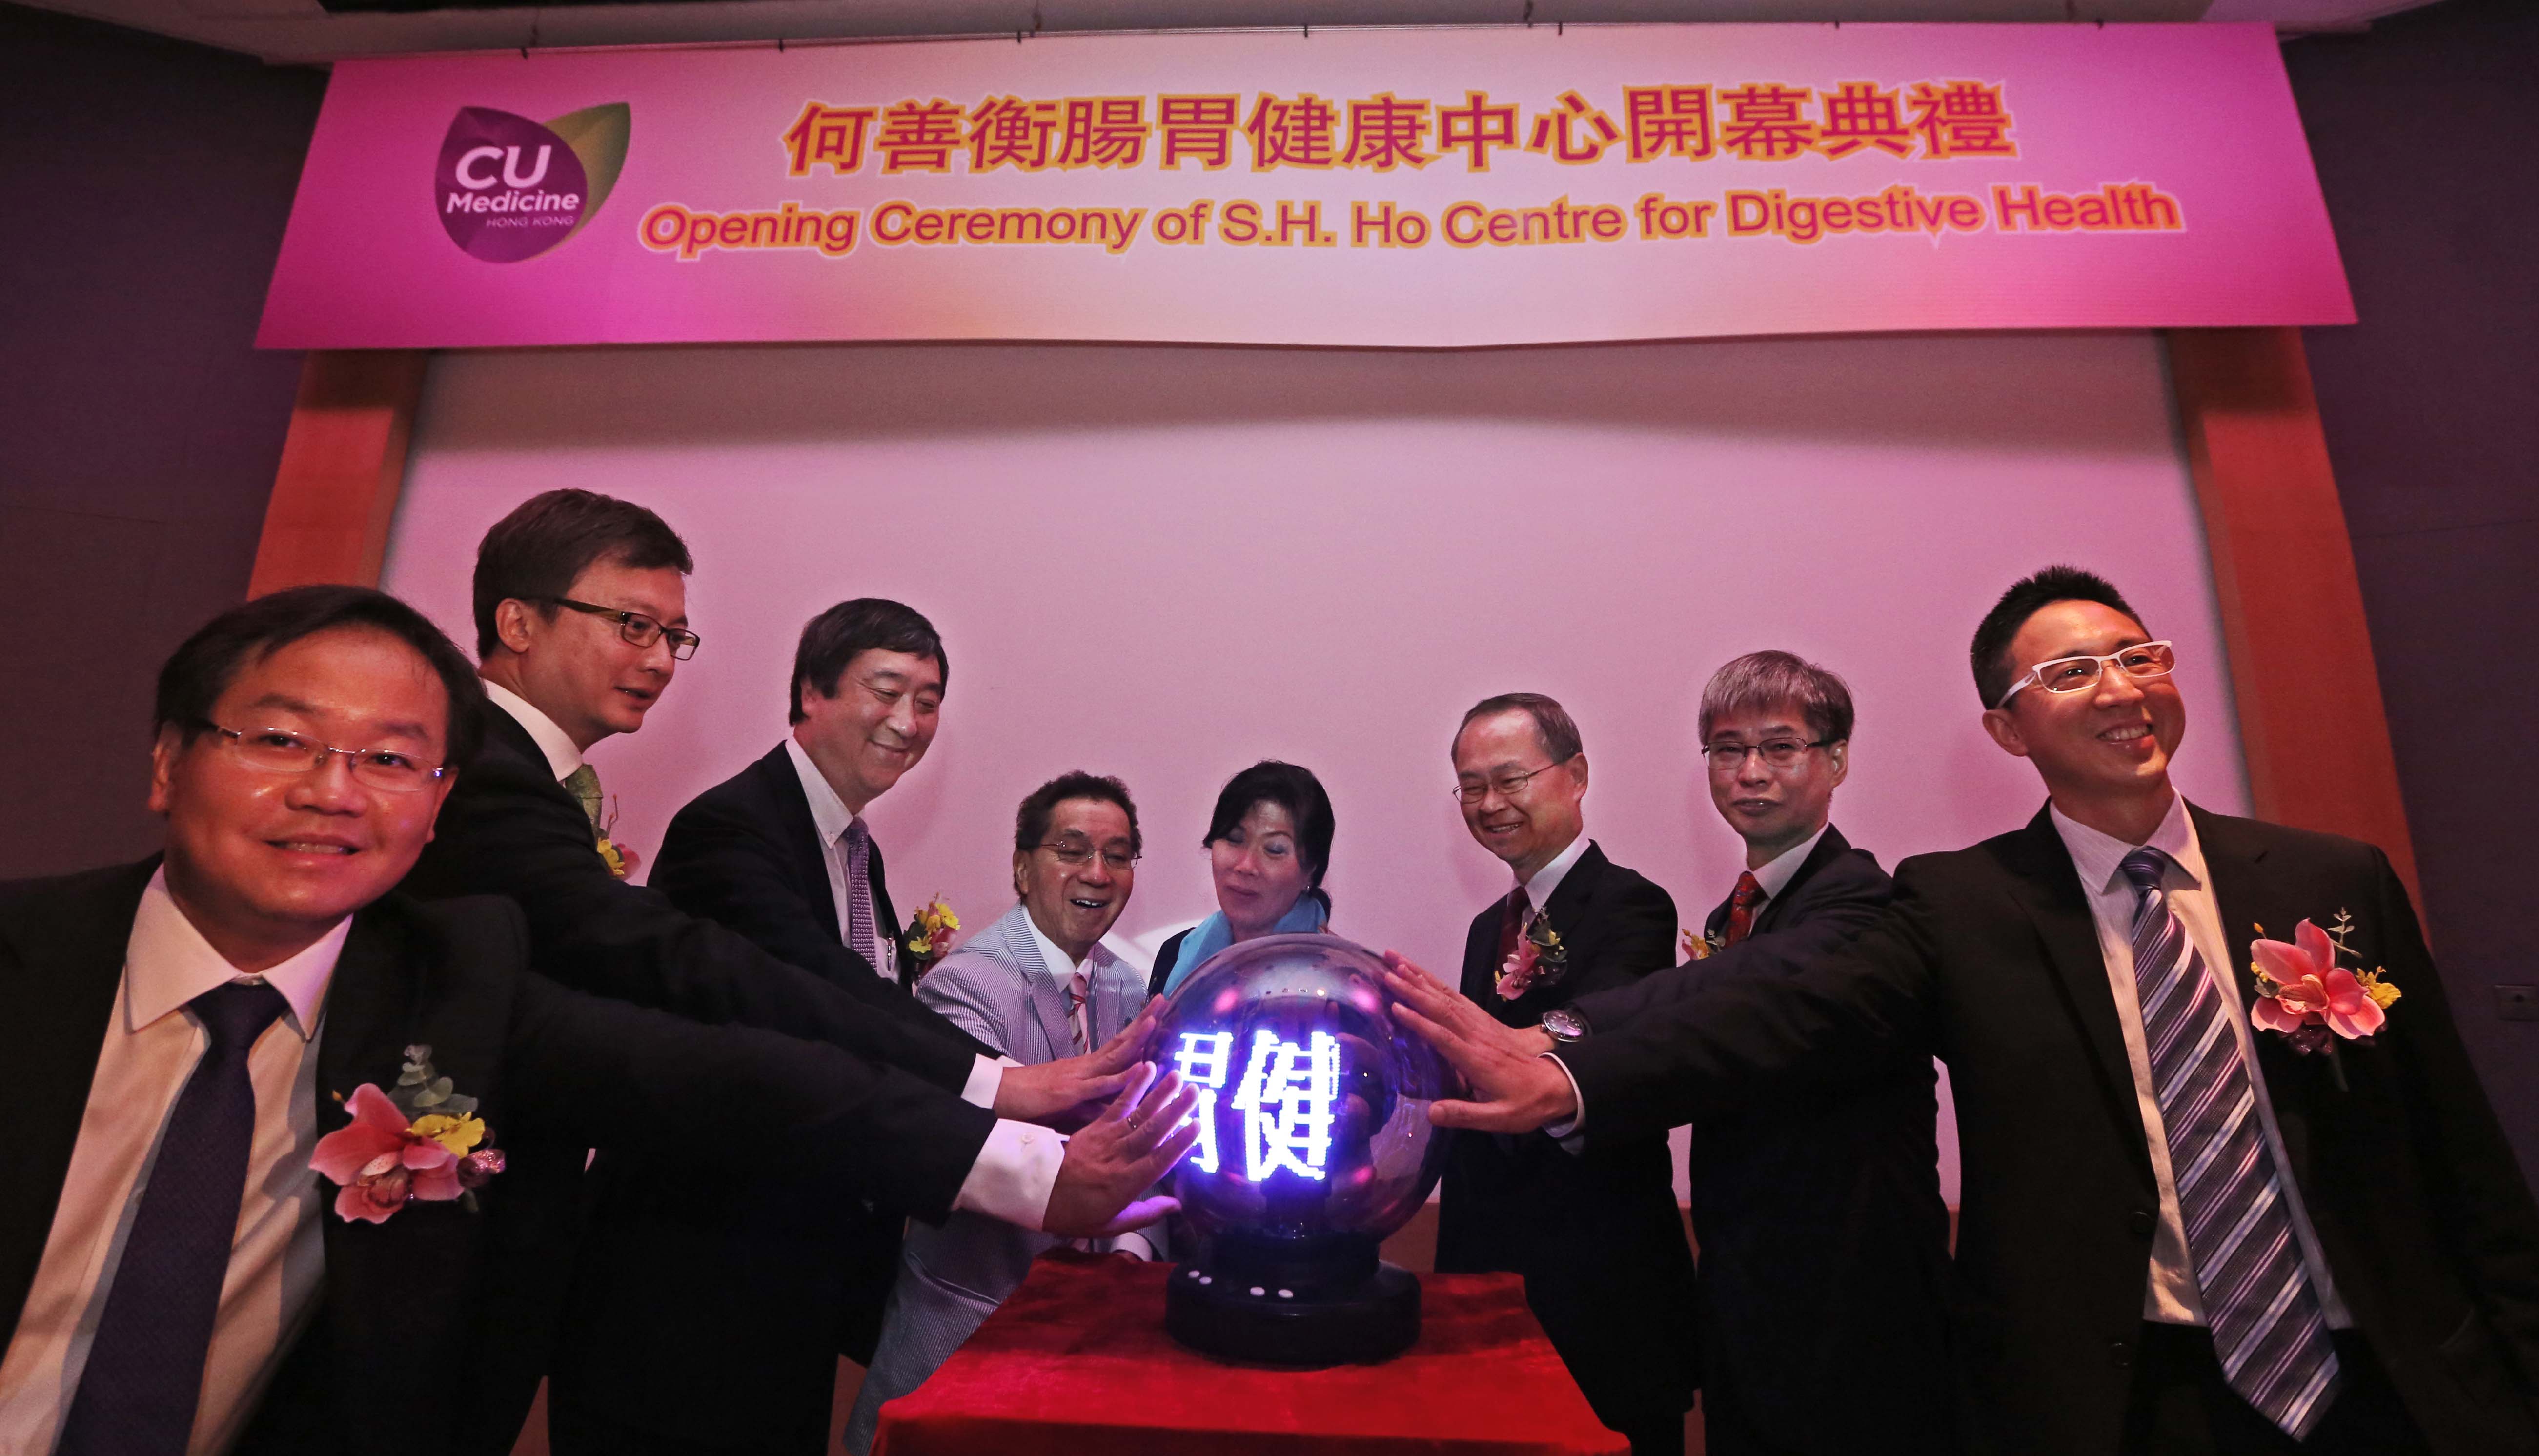 CUHK S.H. Ho Centre for Digestive Health is officially established